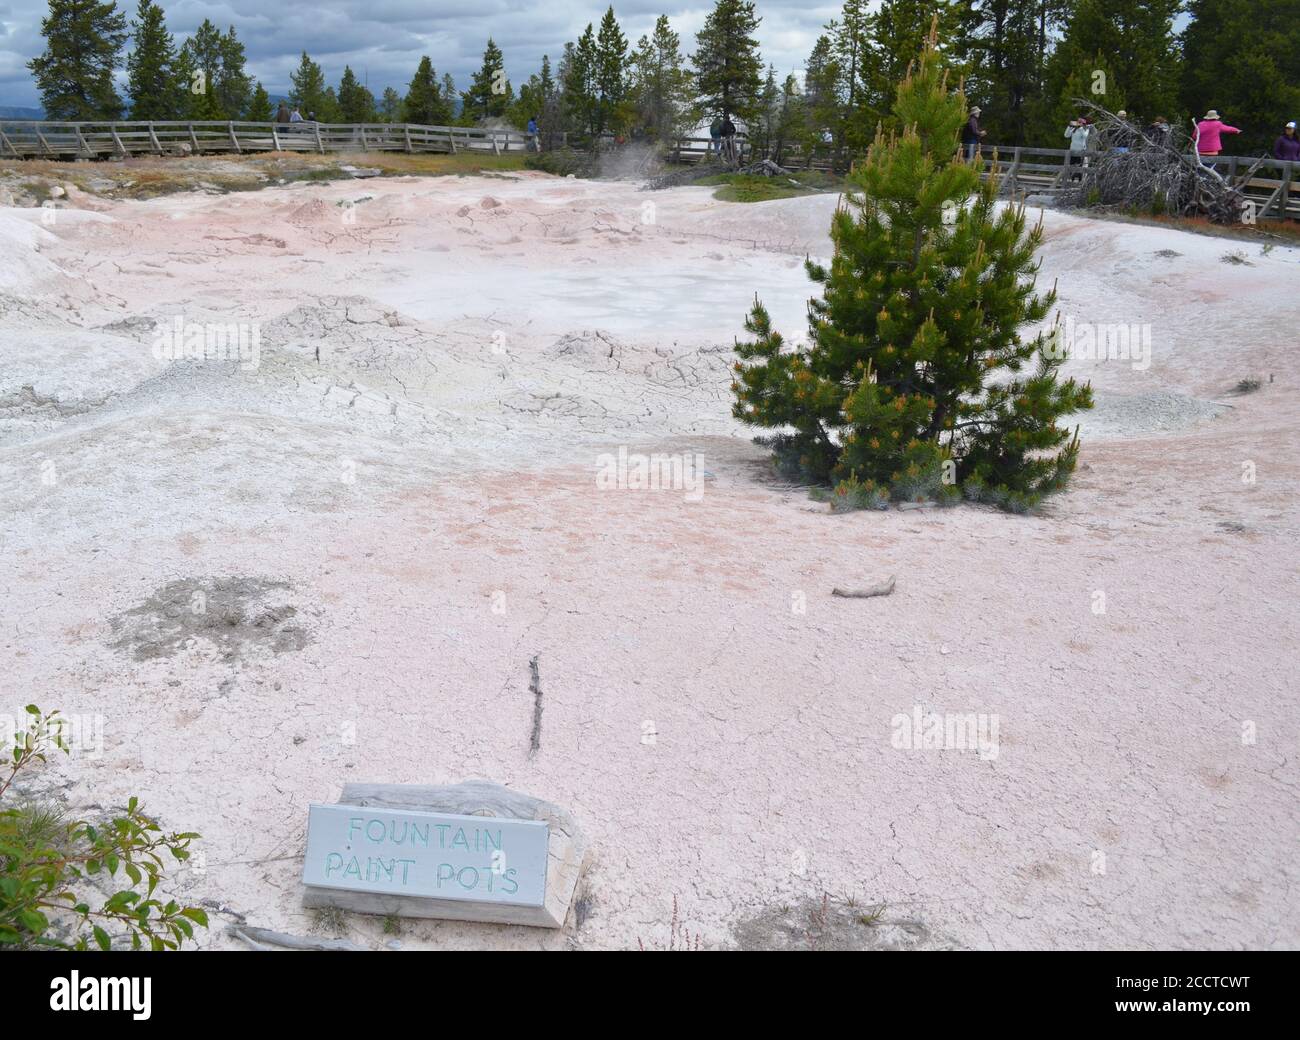 YELLOWSTONE NATIONAL PARK, WYOMING - JUNE 9, 2017: Fountain Paint Pots in the Lower Geyser Basin Stock Photo